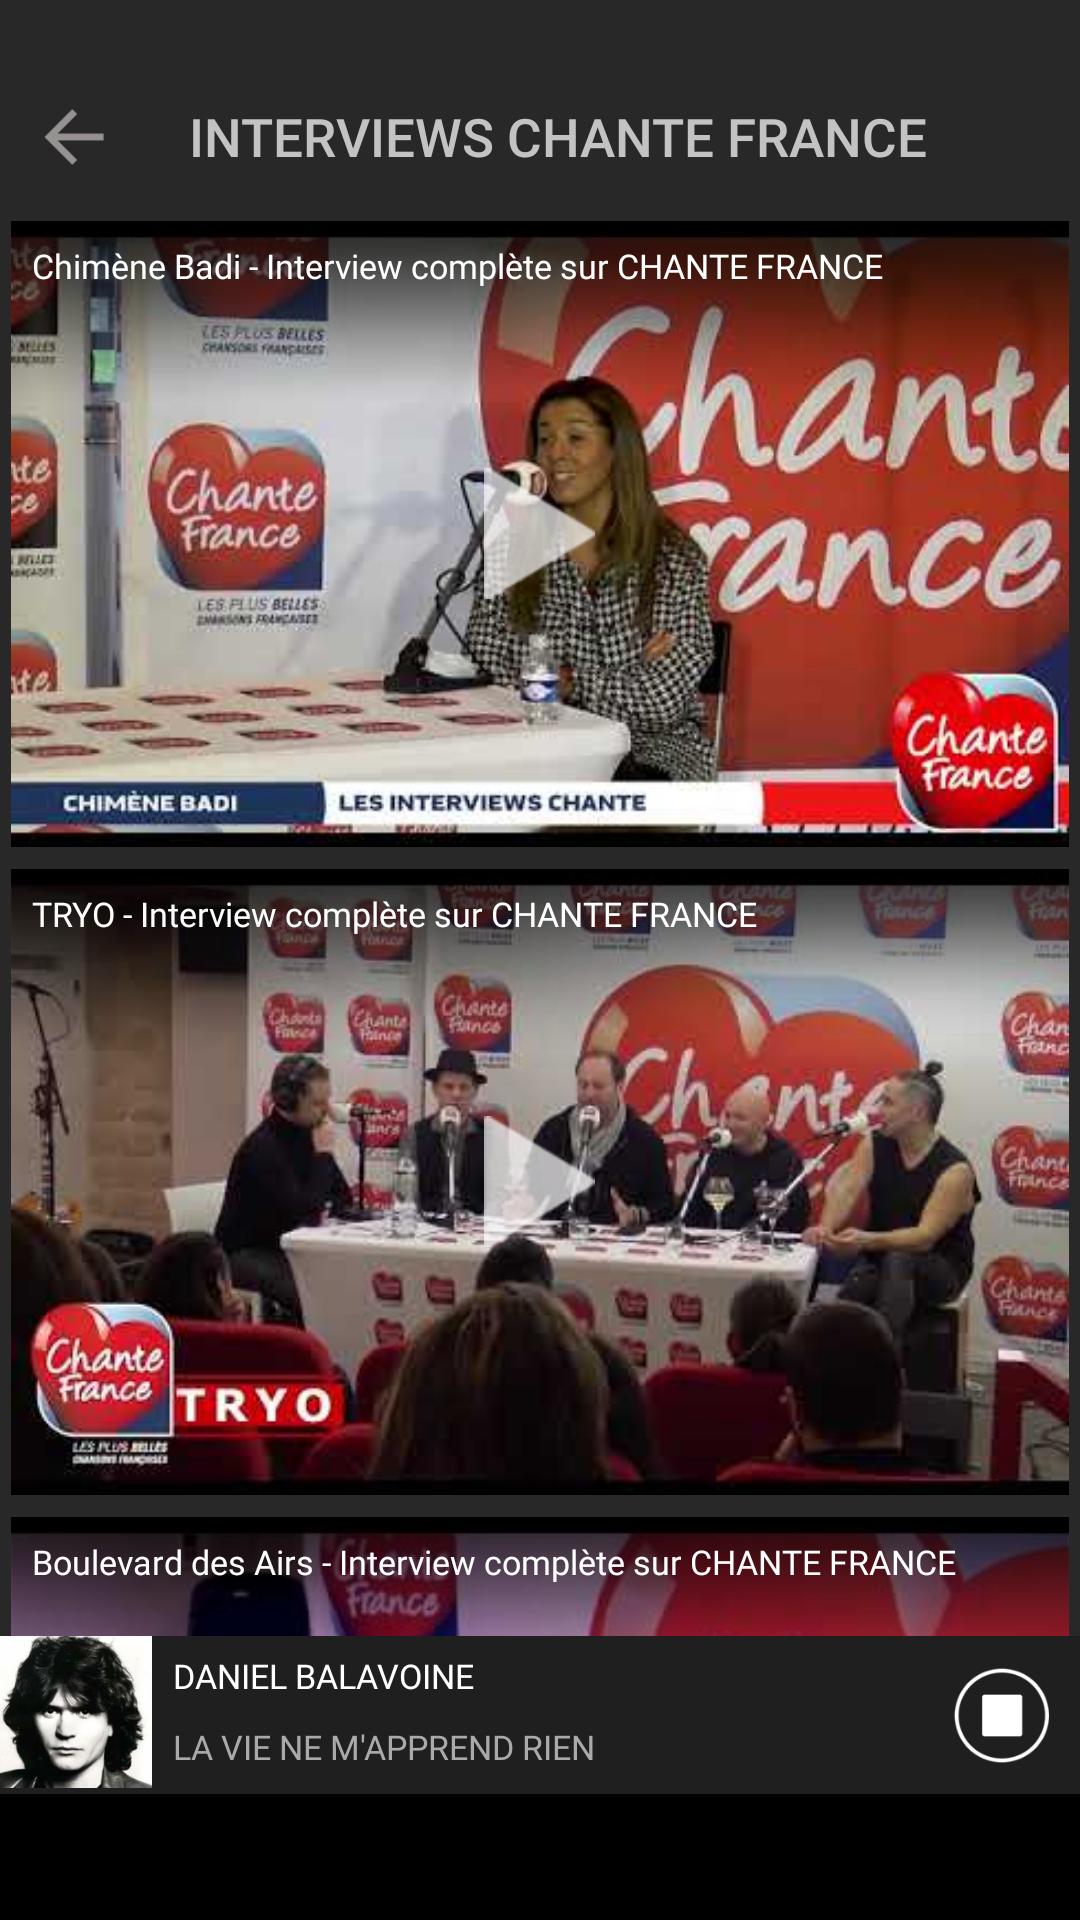 Chante France for Android - APK Download